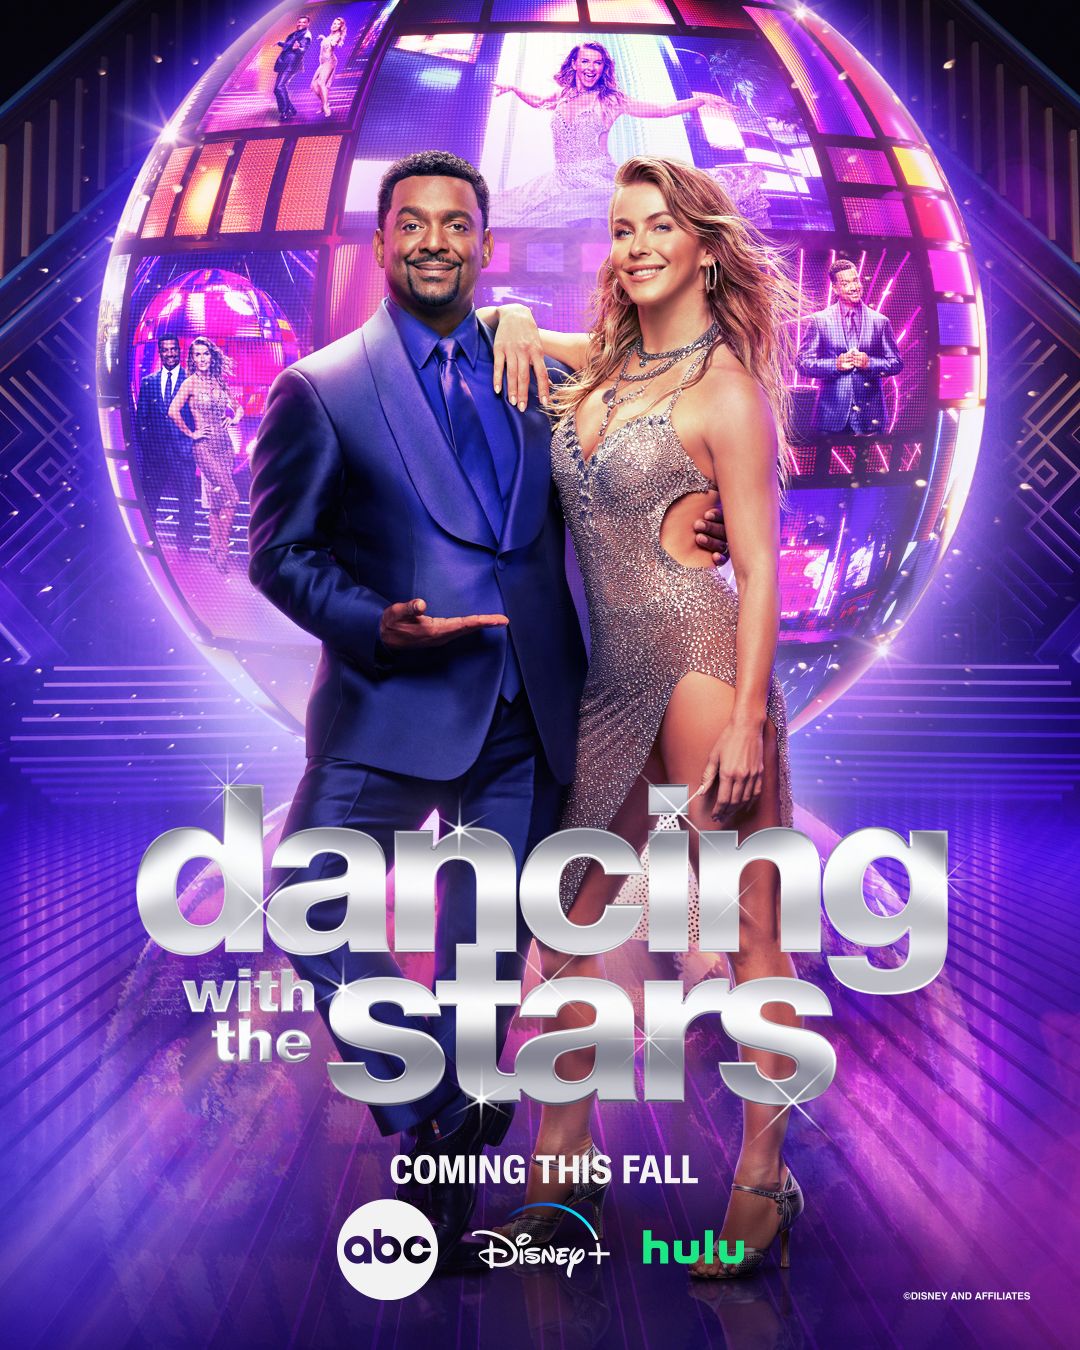 ‘Dancing With The Stars’ Returns This Fall